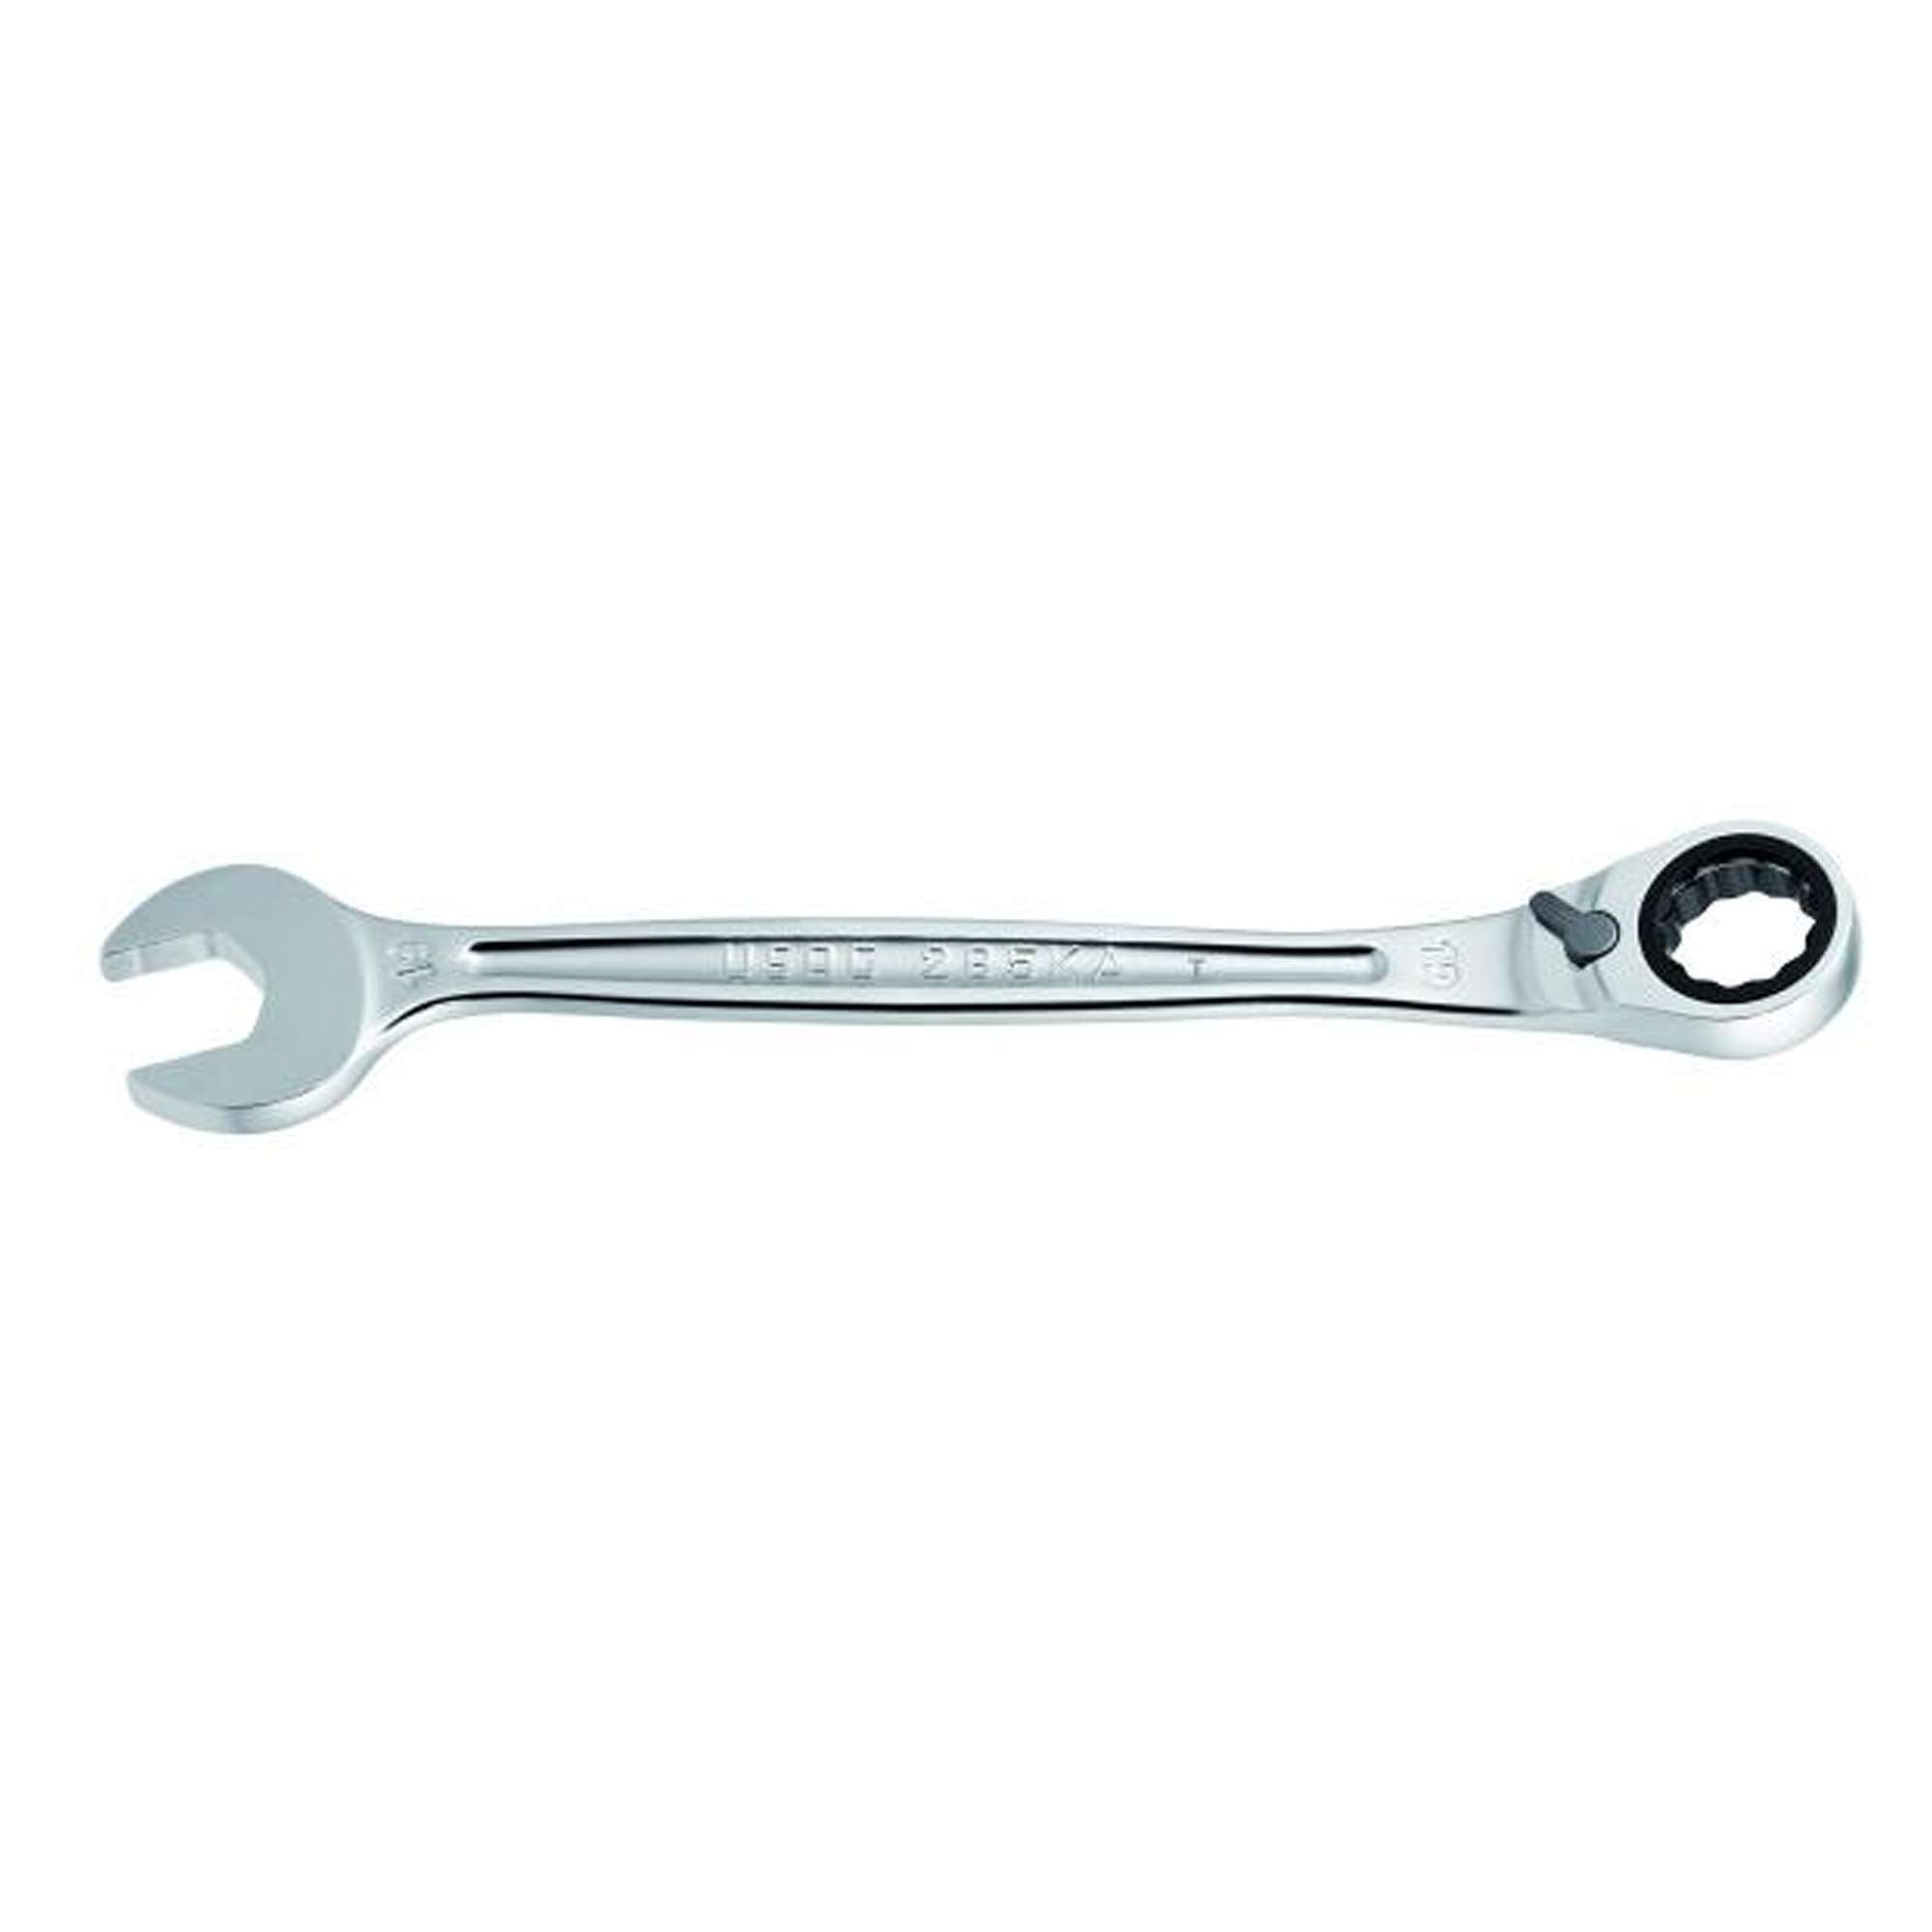 Ratchet combination wrenches with retaining ring - Usag 285 KA